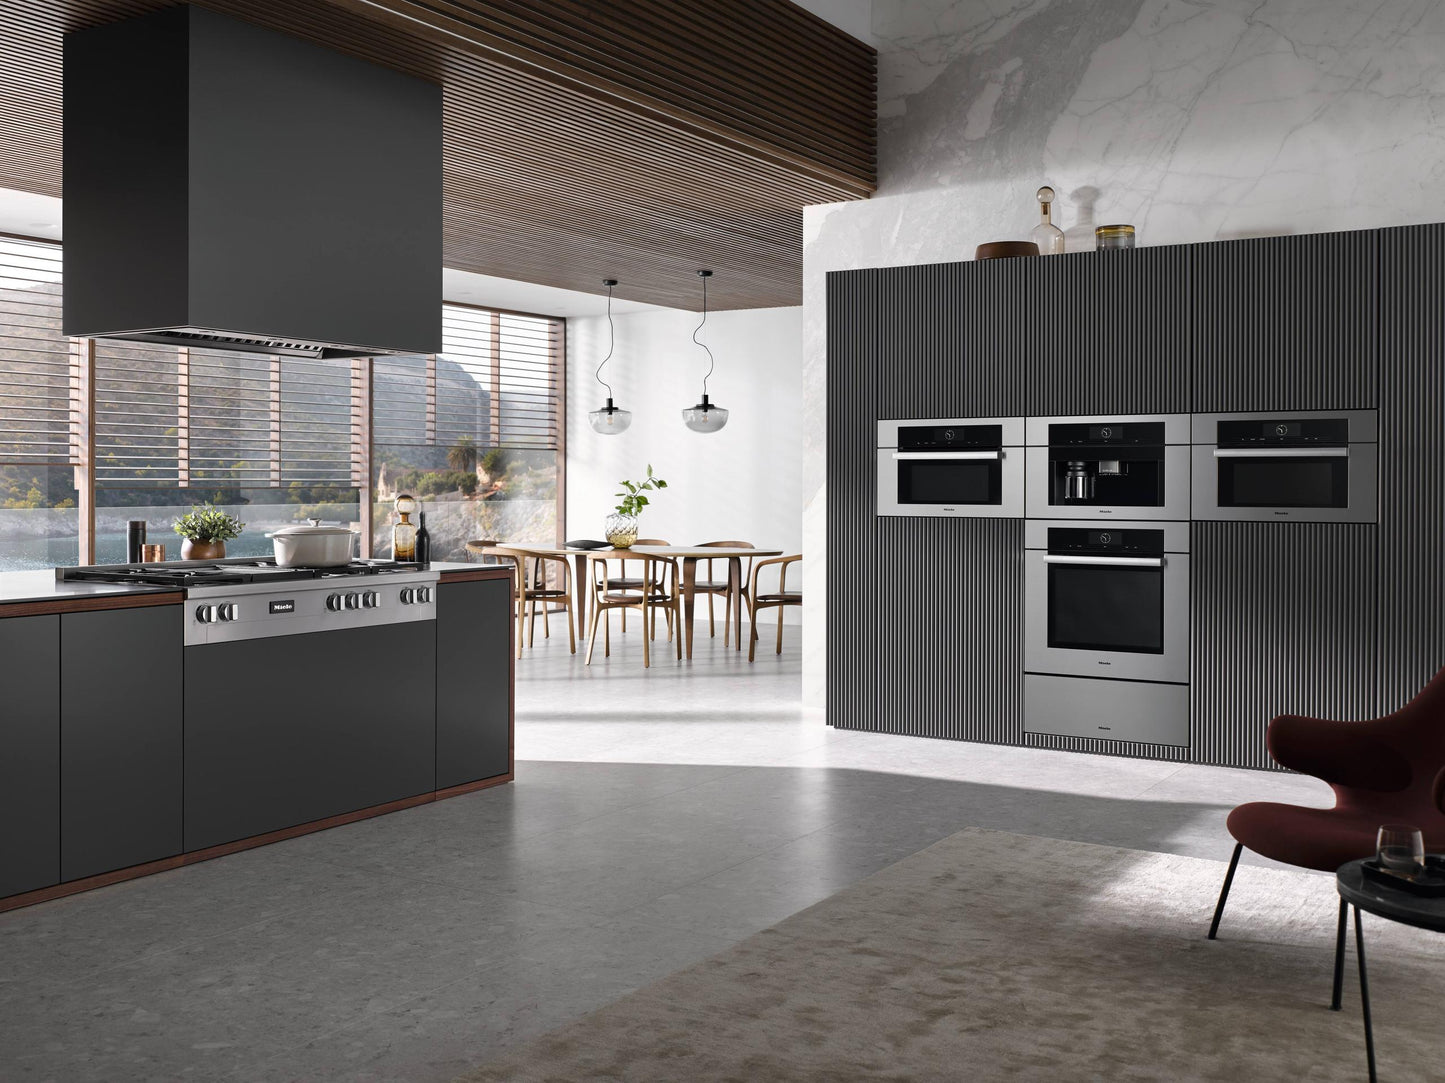 Miele DAR1150STAINLESSSTEEL Dar 1150 - Insert Ventilation Hood For Perfect Combination With Ranges And Rangetops.